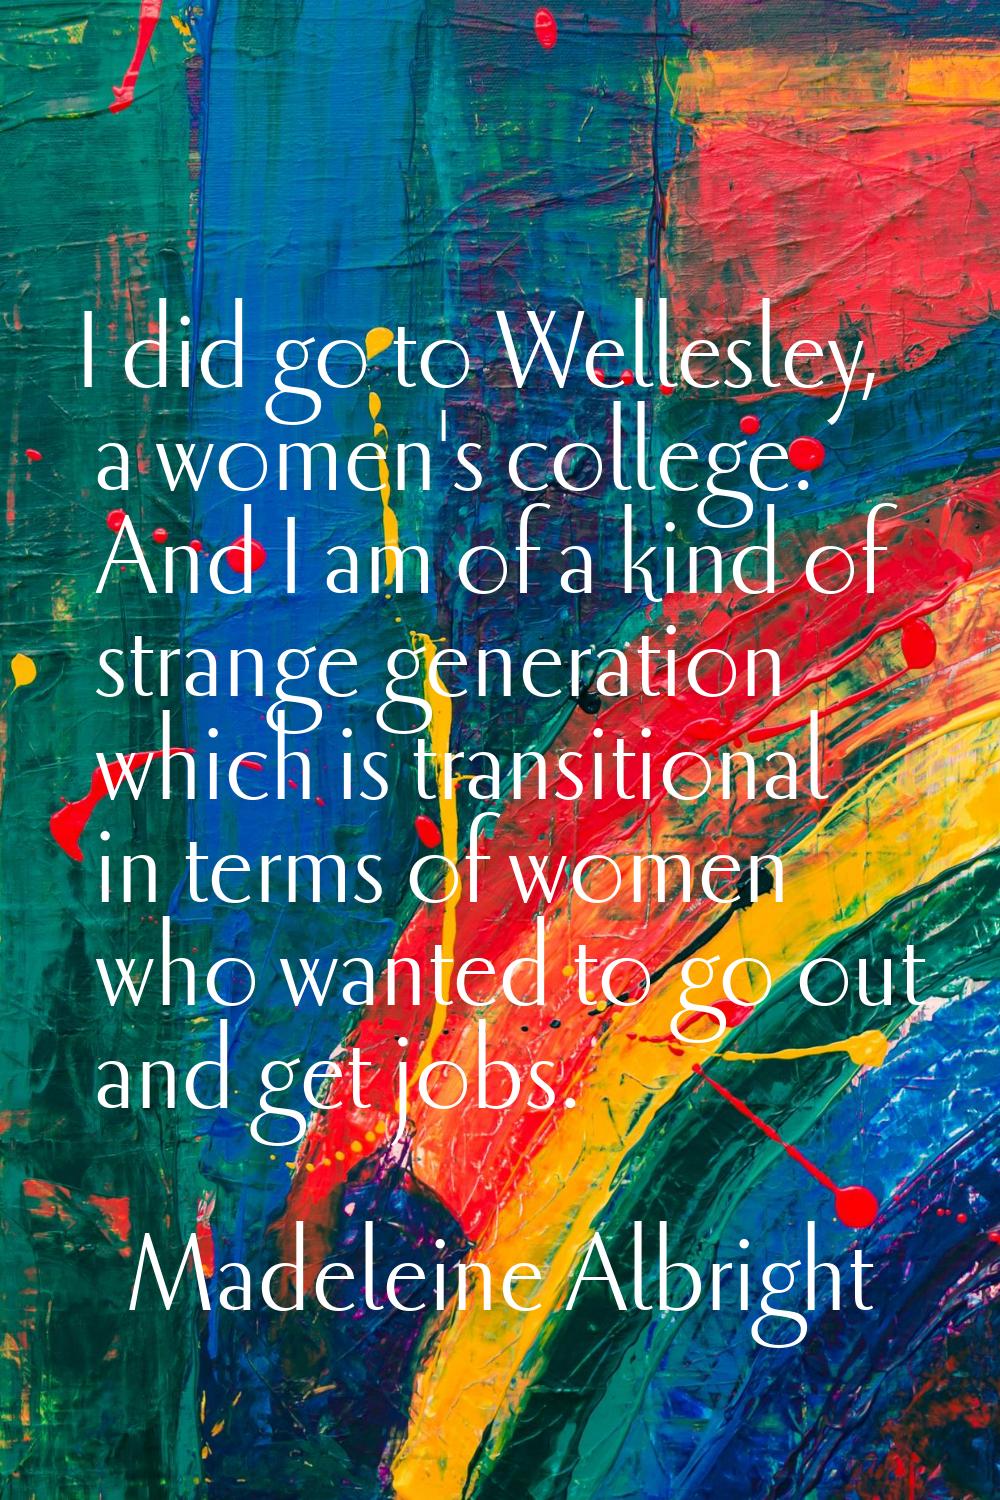 I did go to Wellesley, a women's college. And I am of a kind of strange generation which is transit